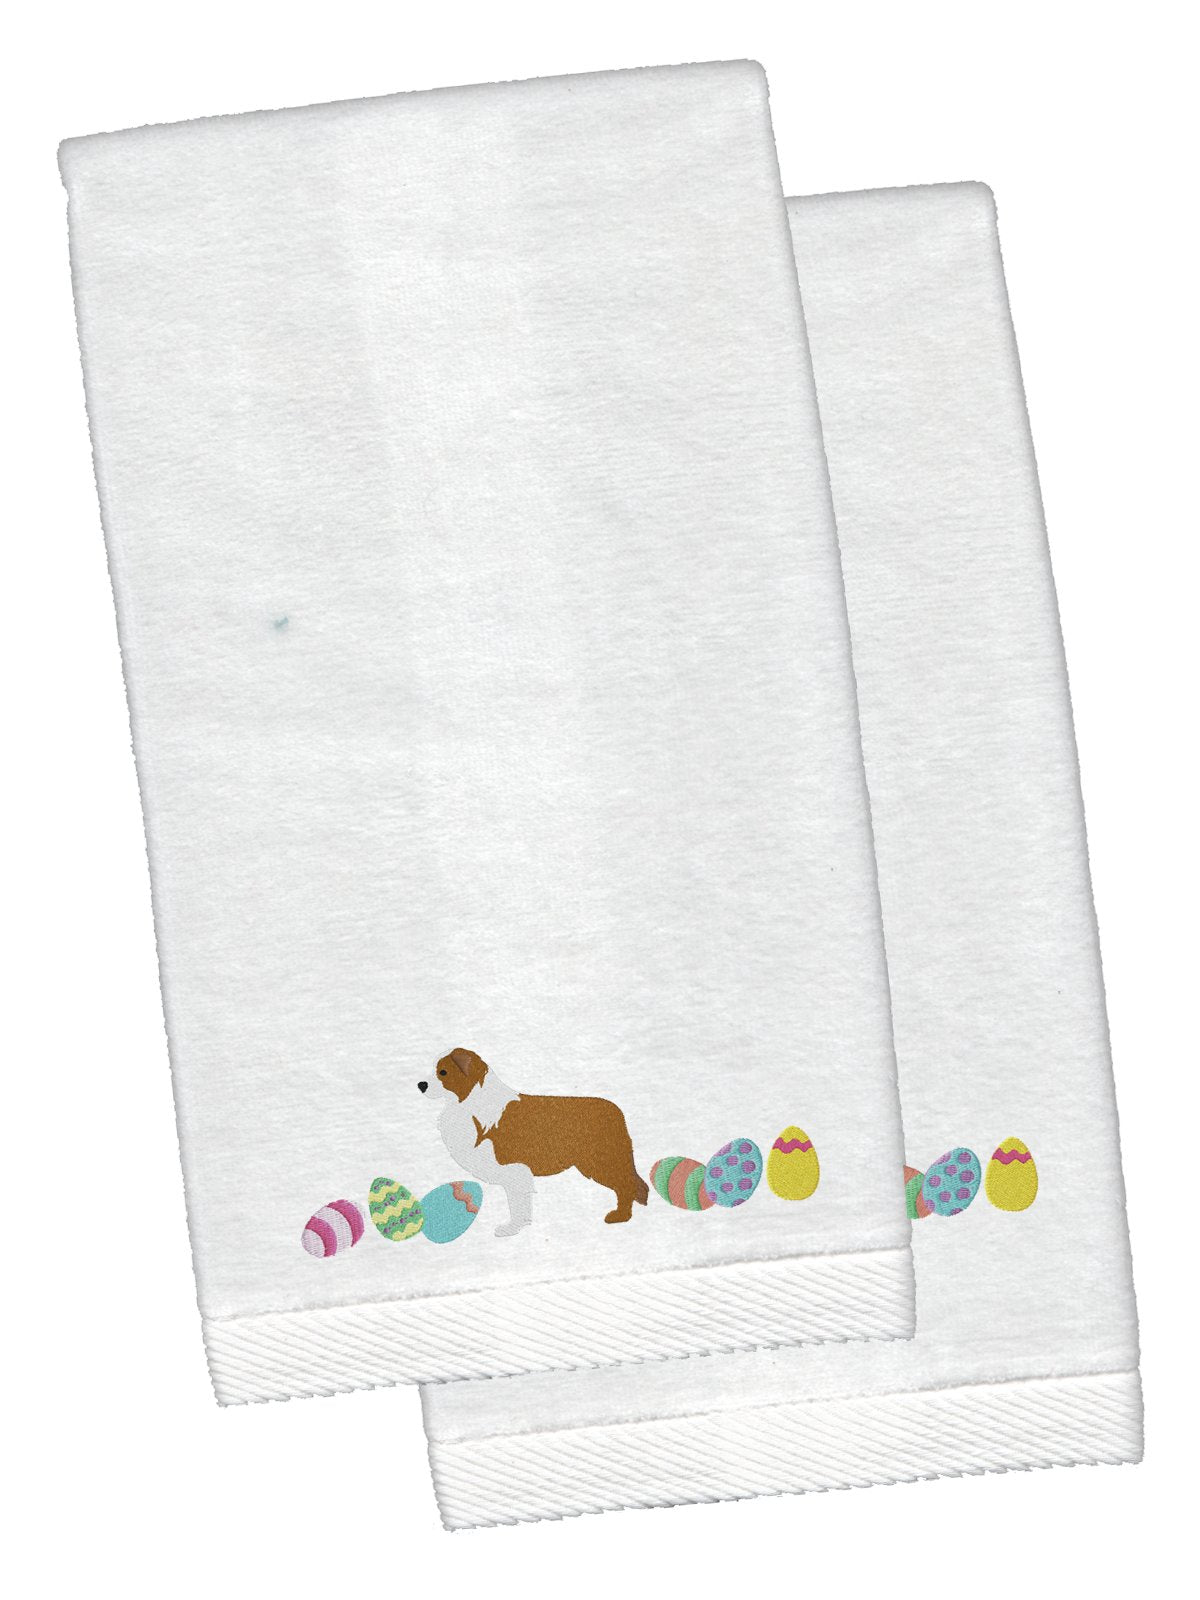 Red Border Collie Easter White Embroidered Plush Hand Towel Set of 2 CK1677KTEMB by Caroline's Treasures